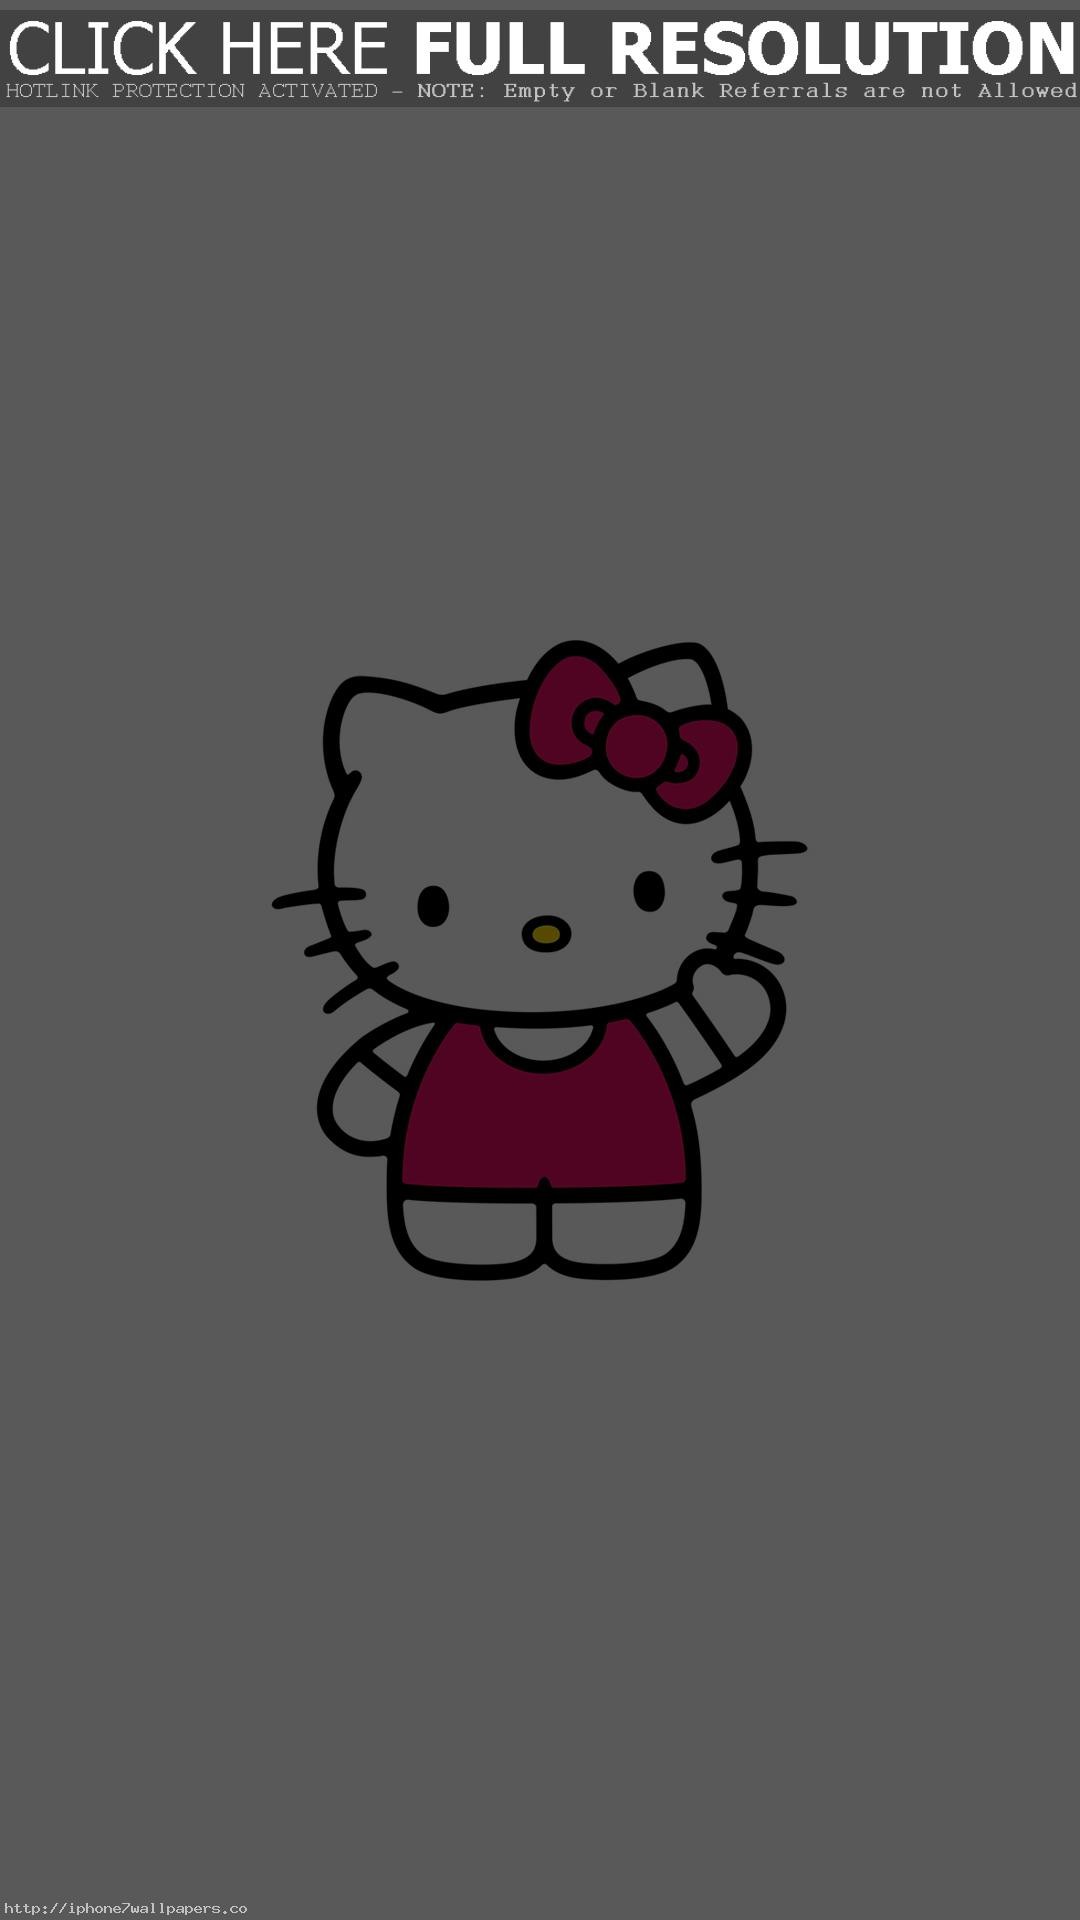 1080x1920 Hello Kitty Art Cute Logo Minimal Android wallpaper - Android HD wallpapers